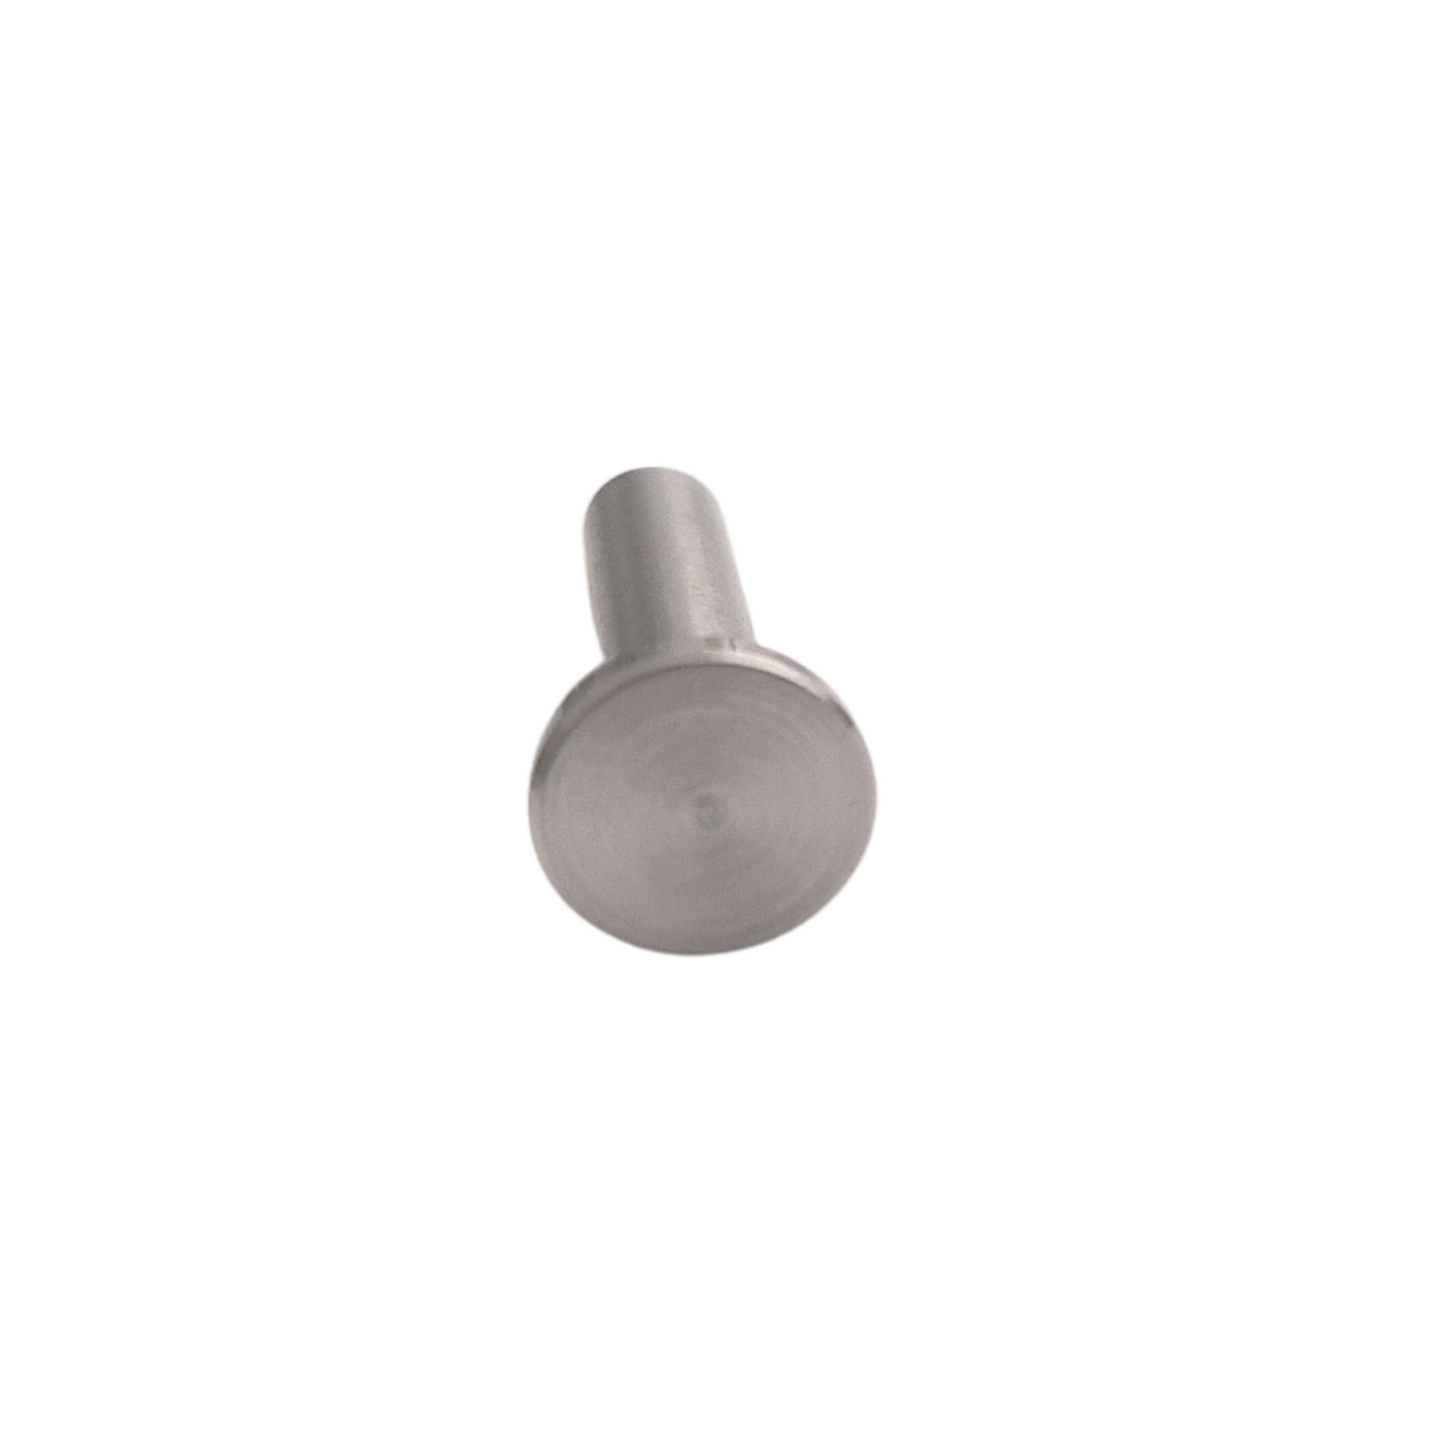 Slimline Swage Stopper for 3mm Cable